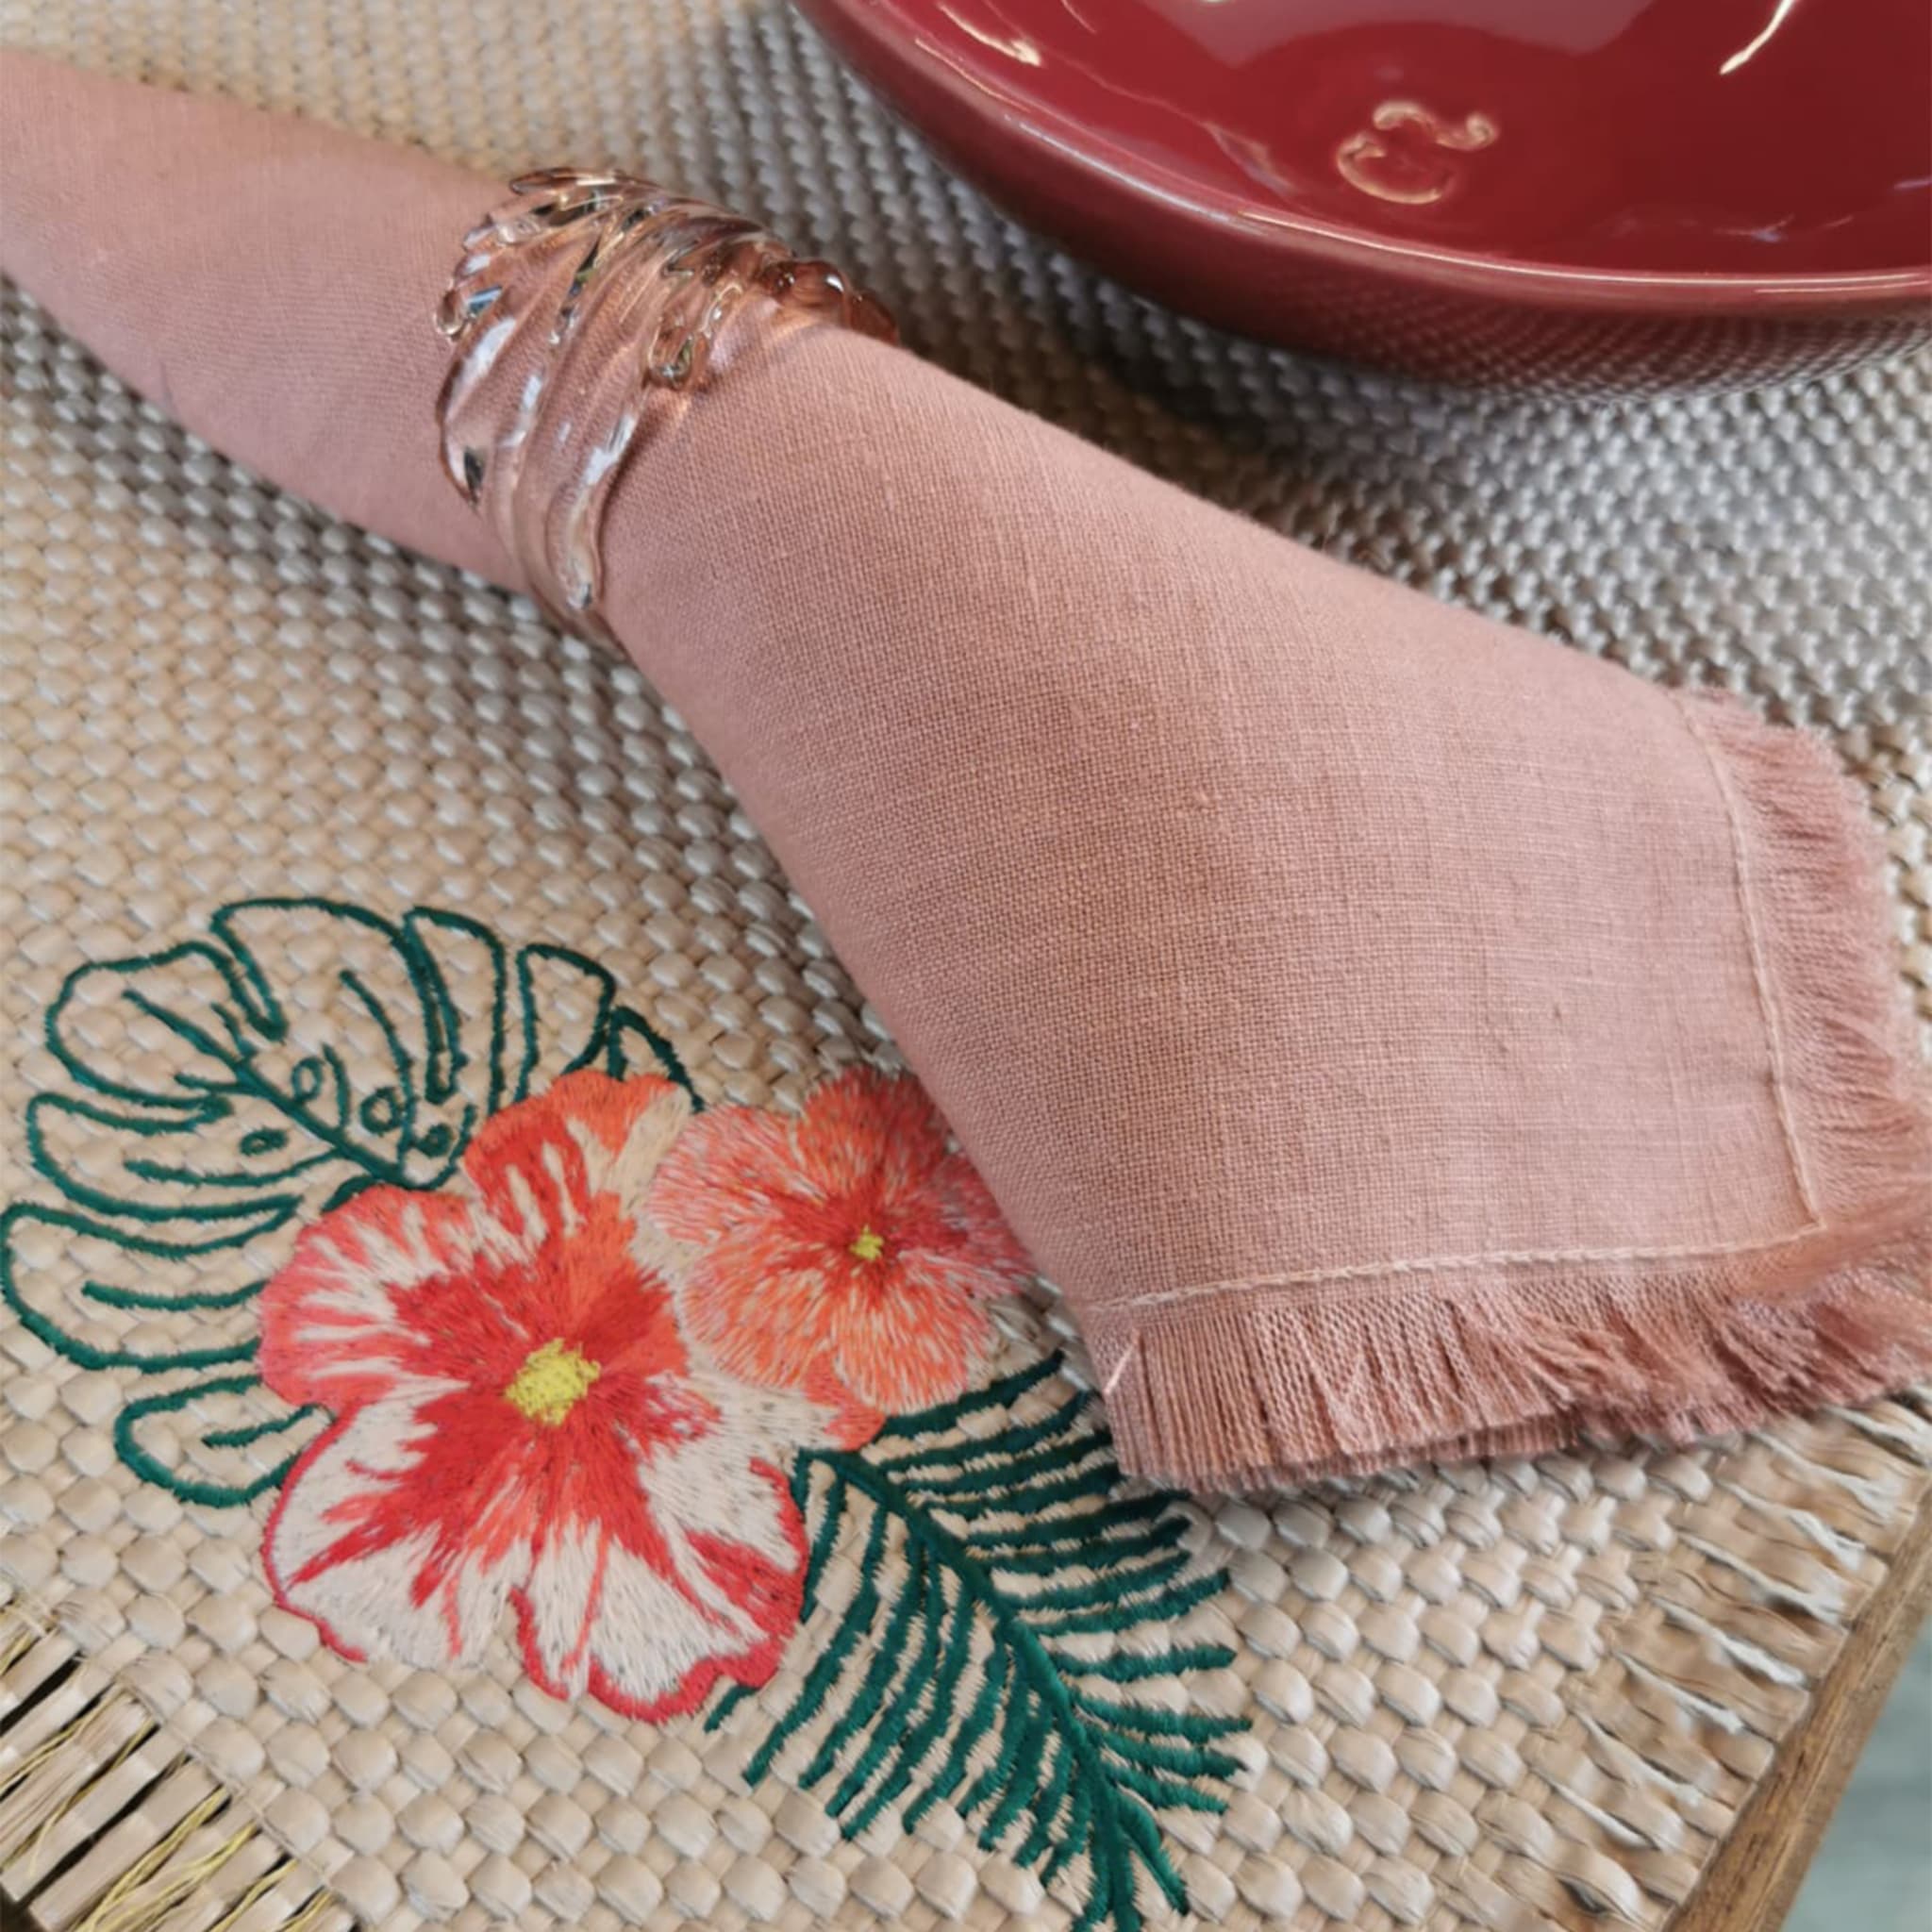  Set of 4 Luxury Hand-Fringed Silver-Pink Pure Linen Napkins - Alternative view 1